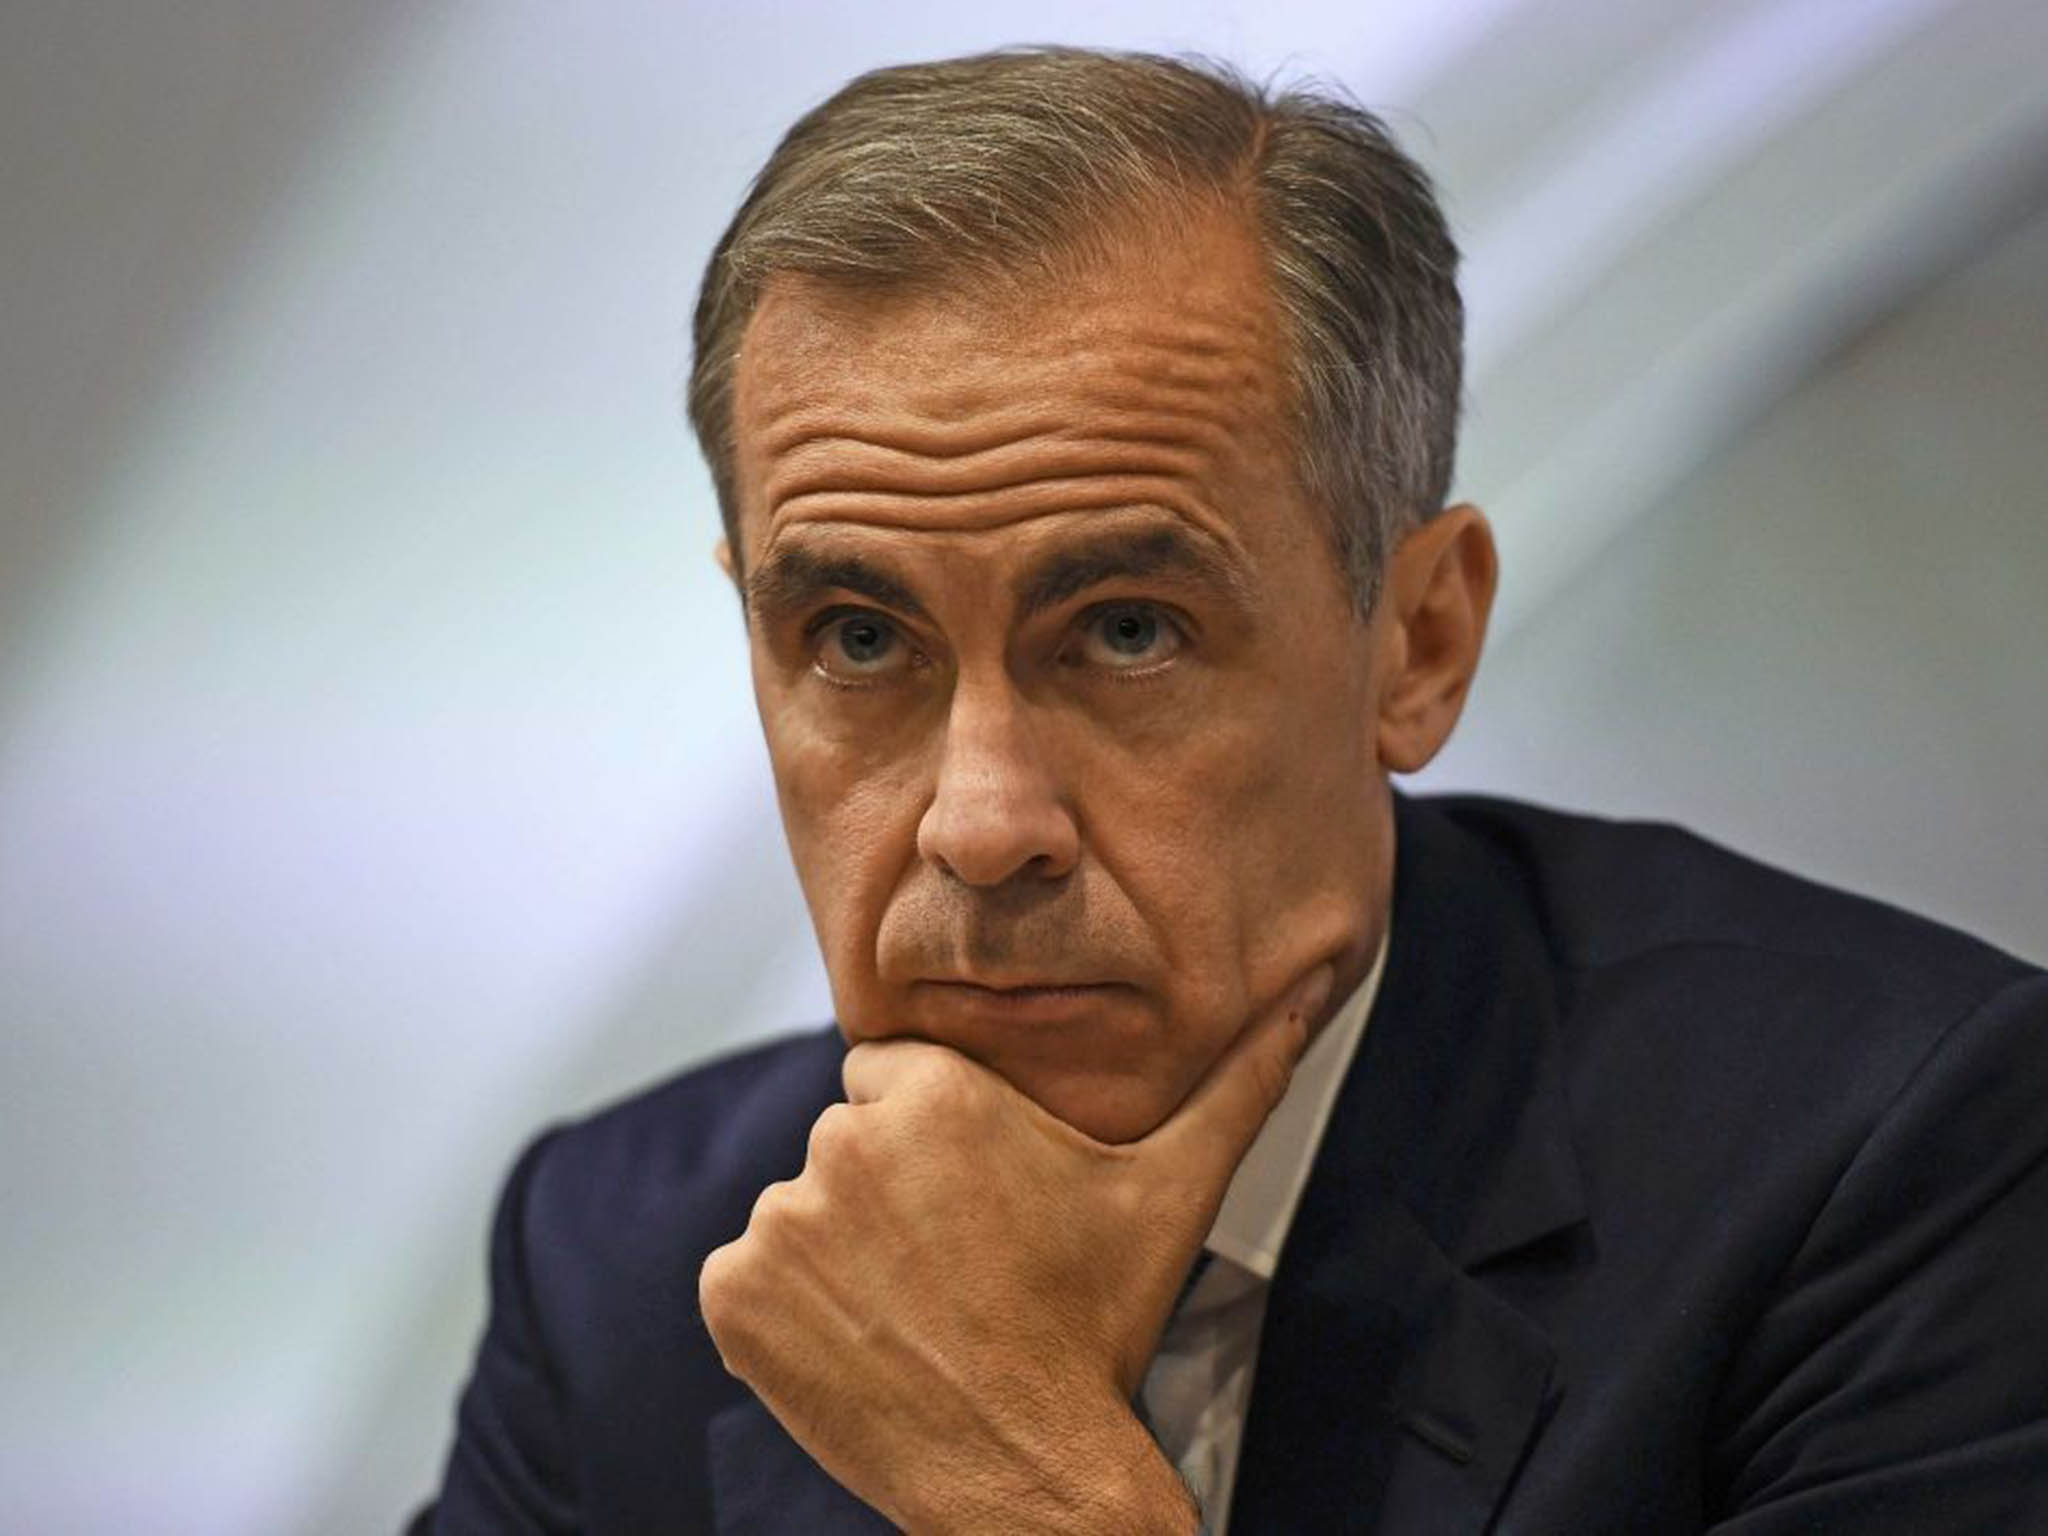 Mark Carney, Governor of the Bank of England, has suggested he would be comfortable if UK banks had much higher liabilities